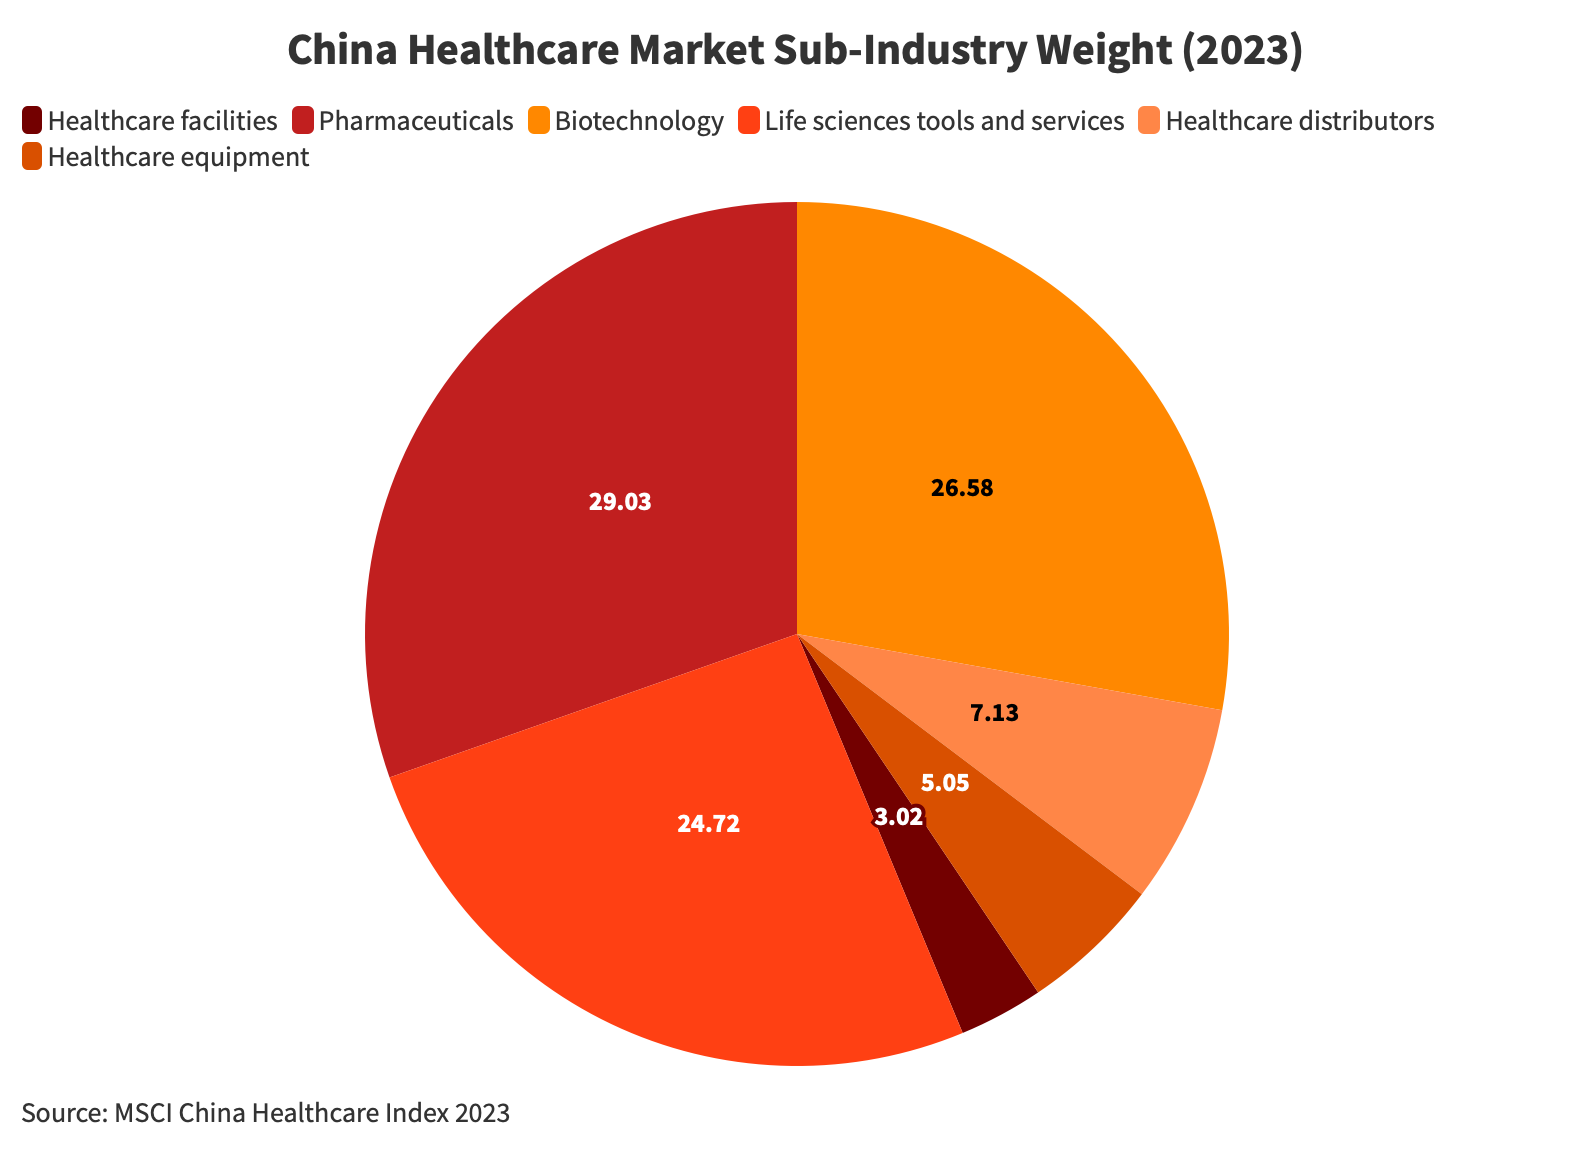 China healthcare sub-industry